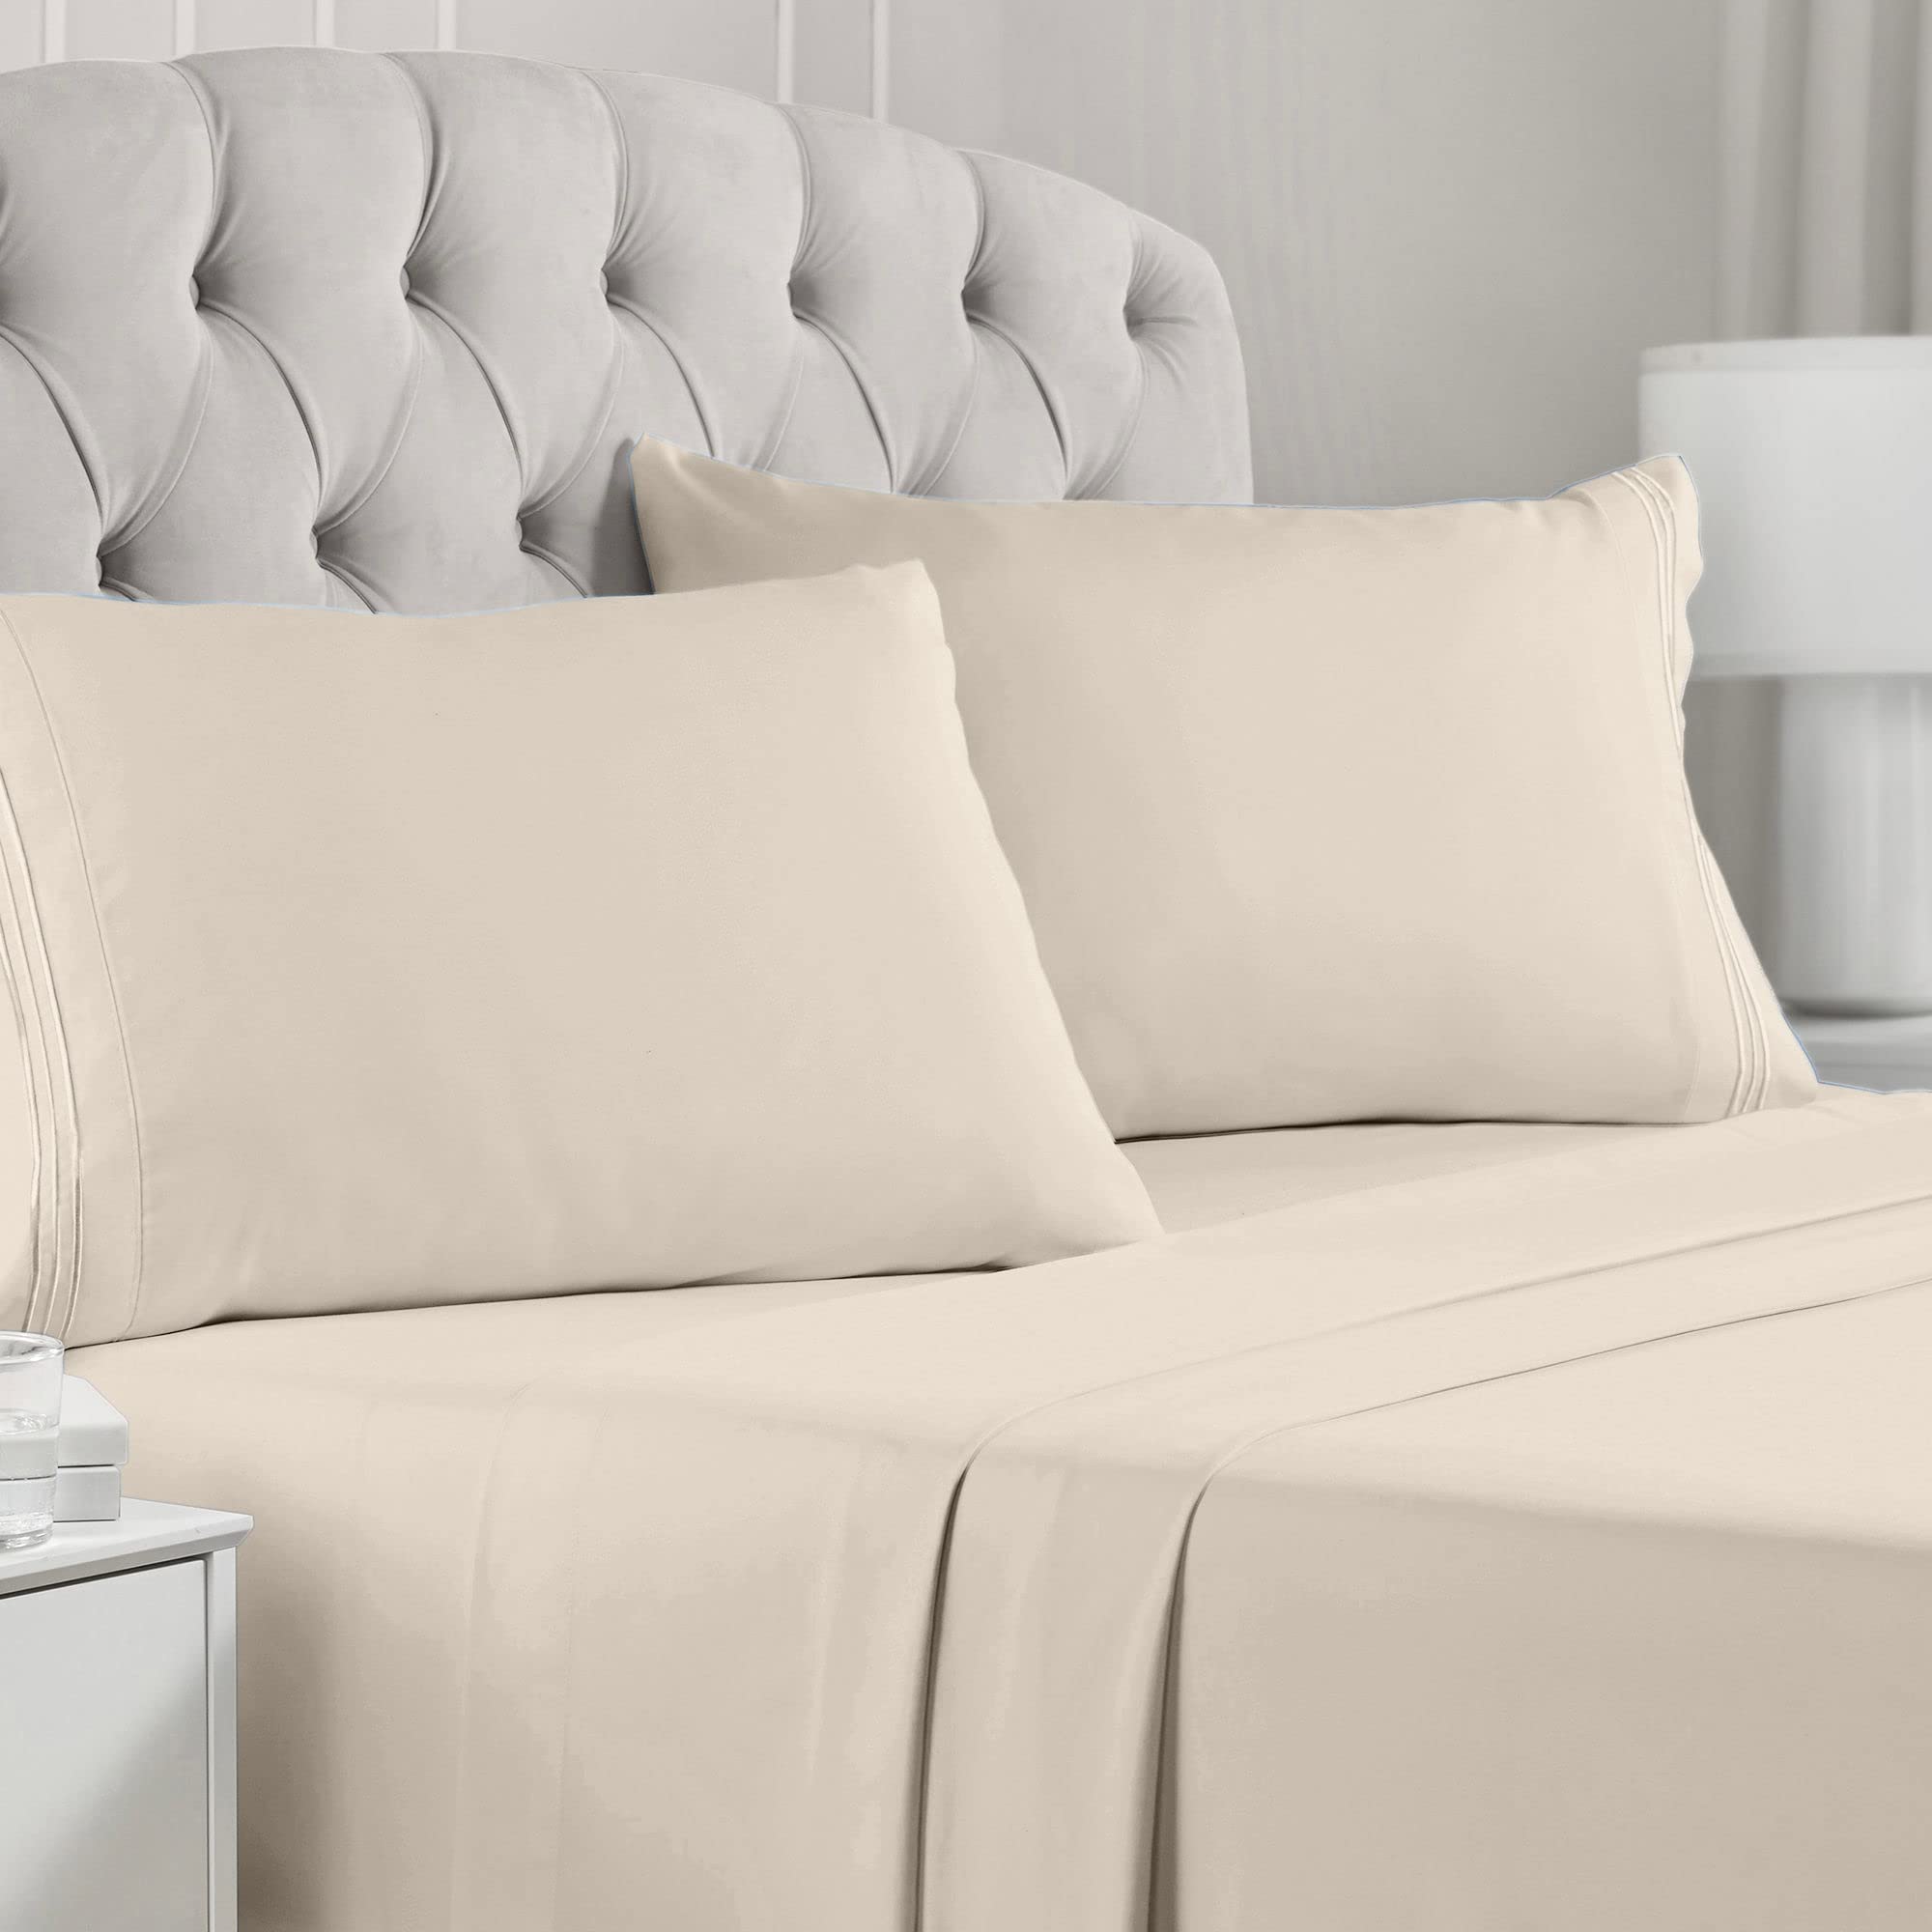 Book Cover Mellanni Full Size Sheet Set - 4 Piece Iconic Collection Bedding Sheets & Pillowcases - Luxury, Extra Soft, Cooling Bed Sheets - Deep Pocket up to 16